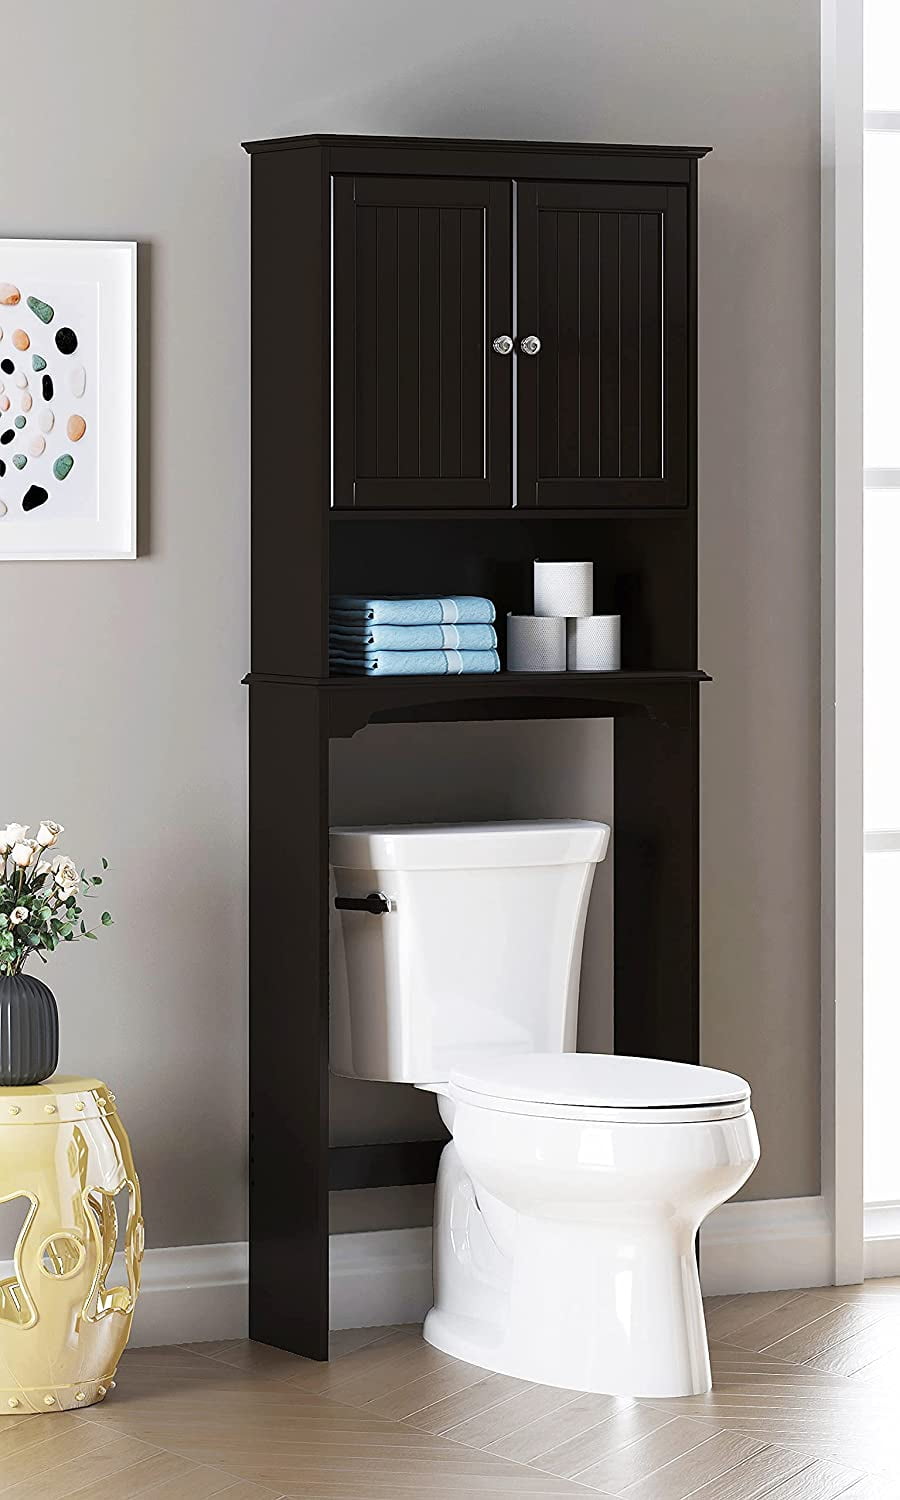 Home Over The Toilet Storage Cabinet, Bathroom Shelf Over Toilet